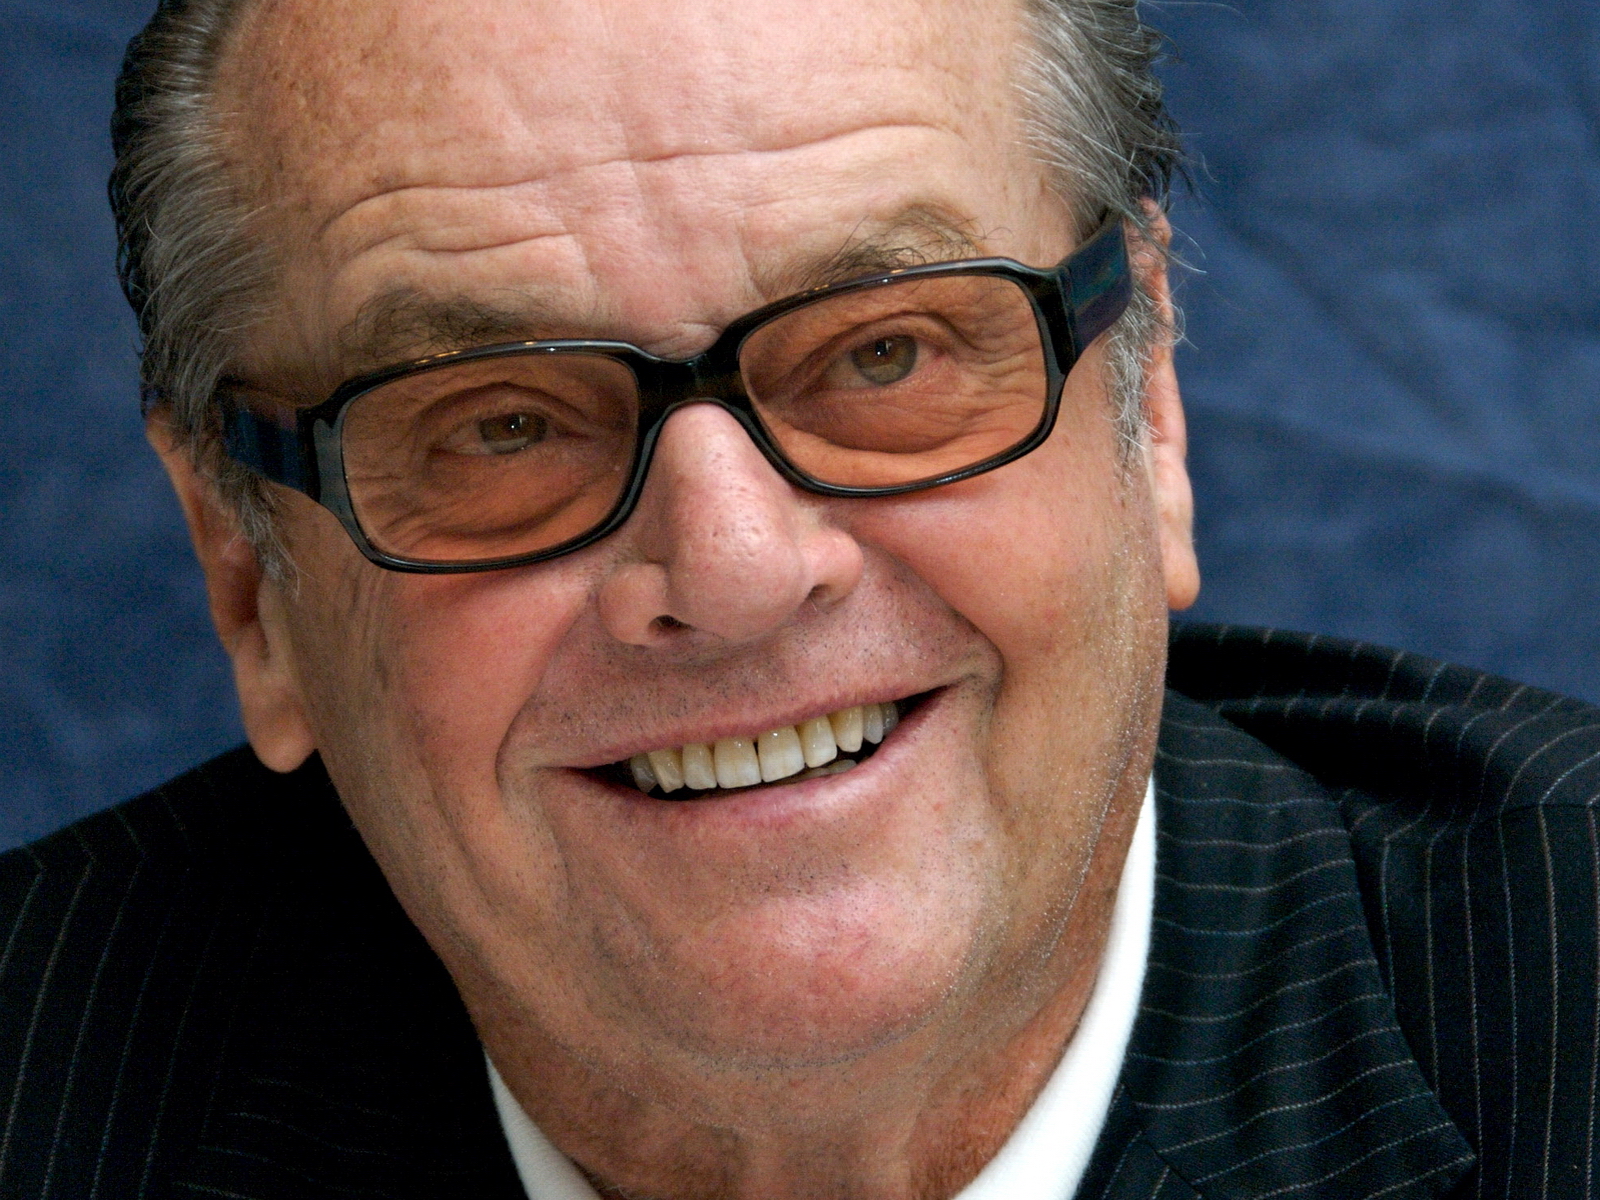 Jack Nicholson, His sister turned out to be his mother